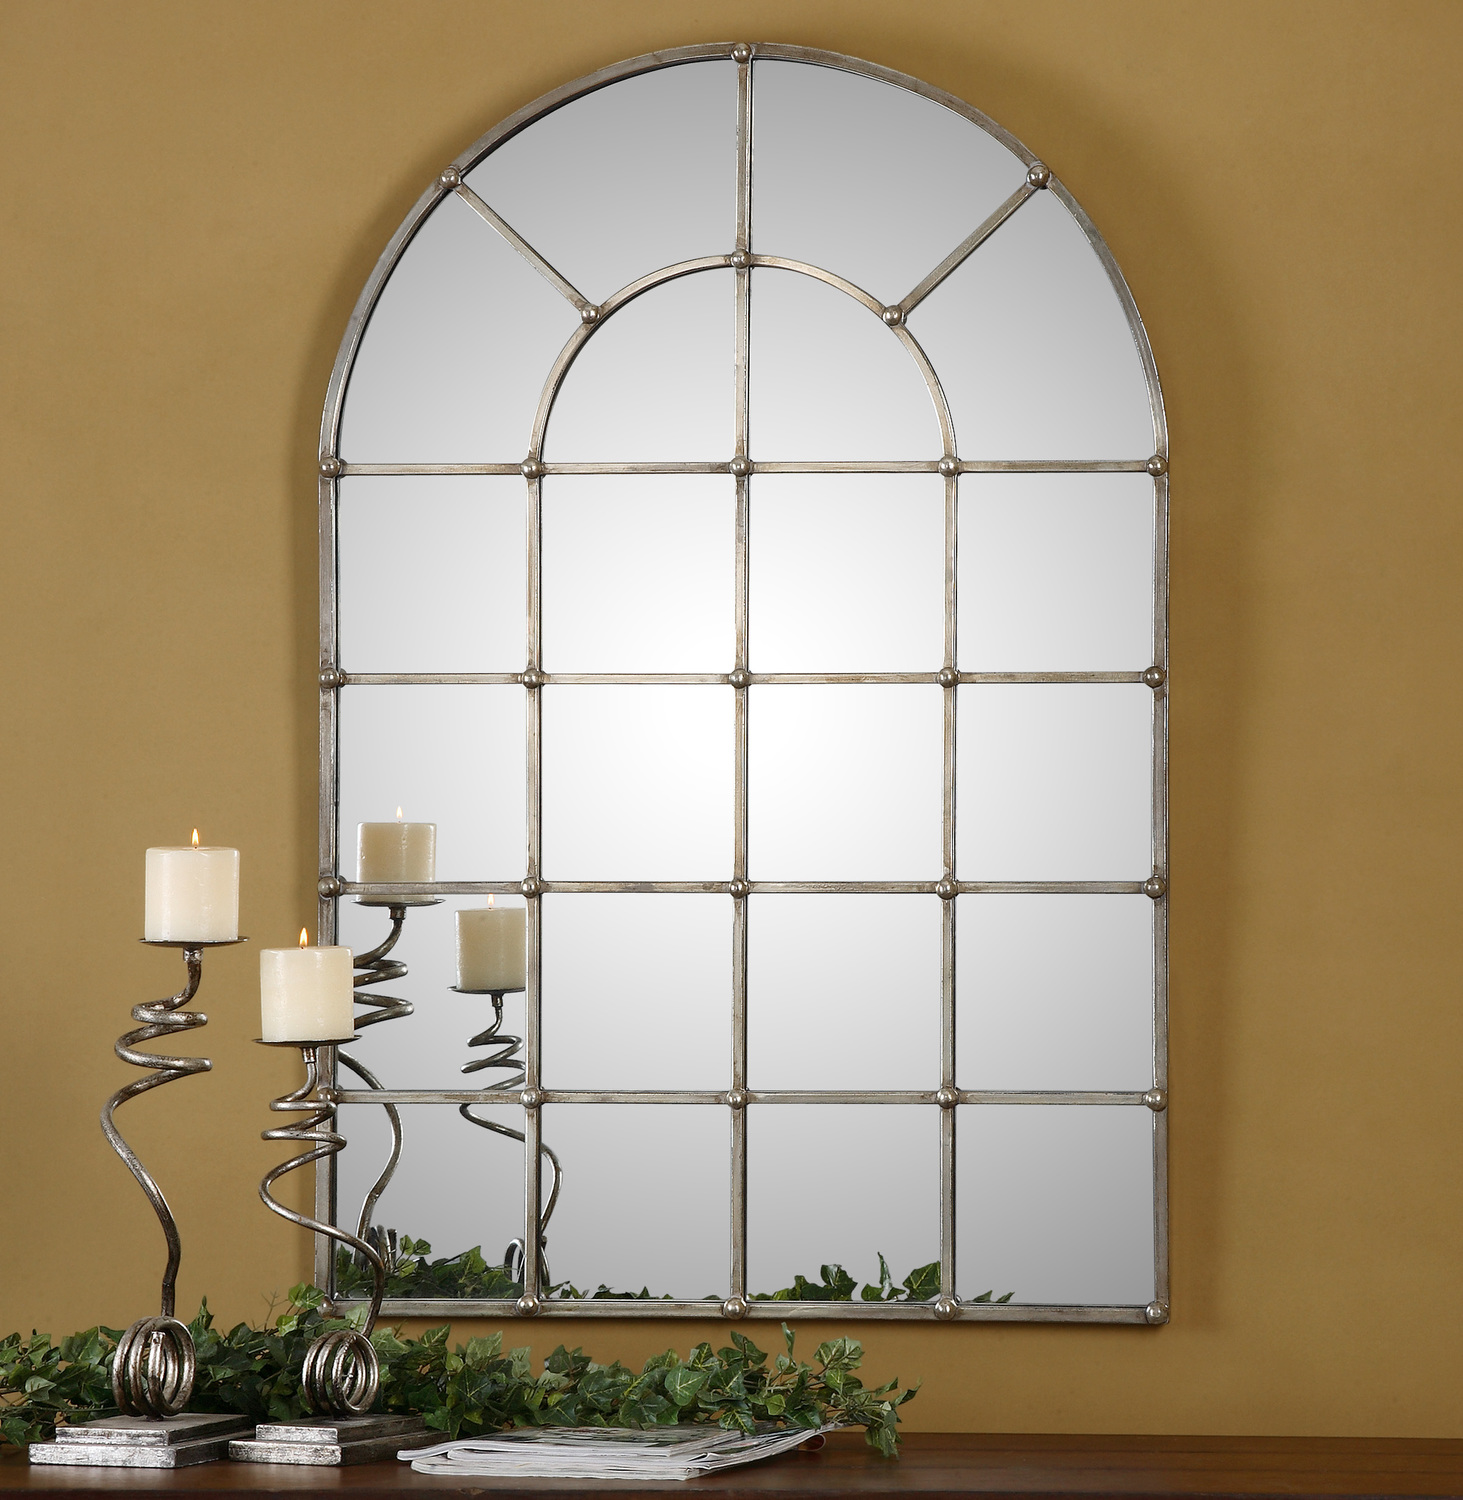 modern oval wall mirror Uttermost Arch Window Mirrors Hand Forged Metal Finished In A Oxidized Plated Silver. NA